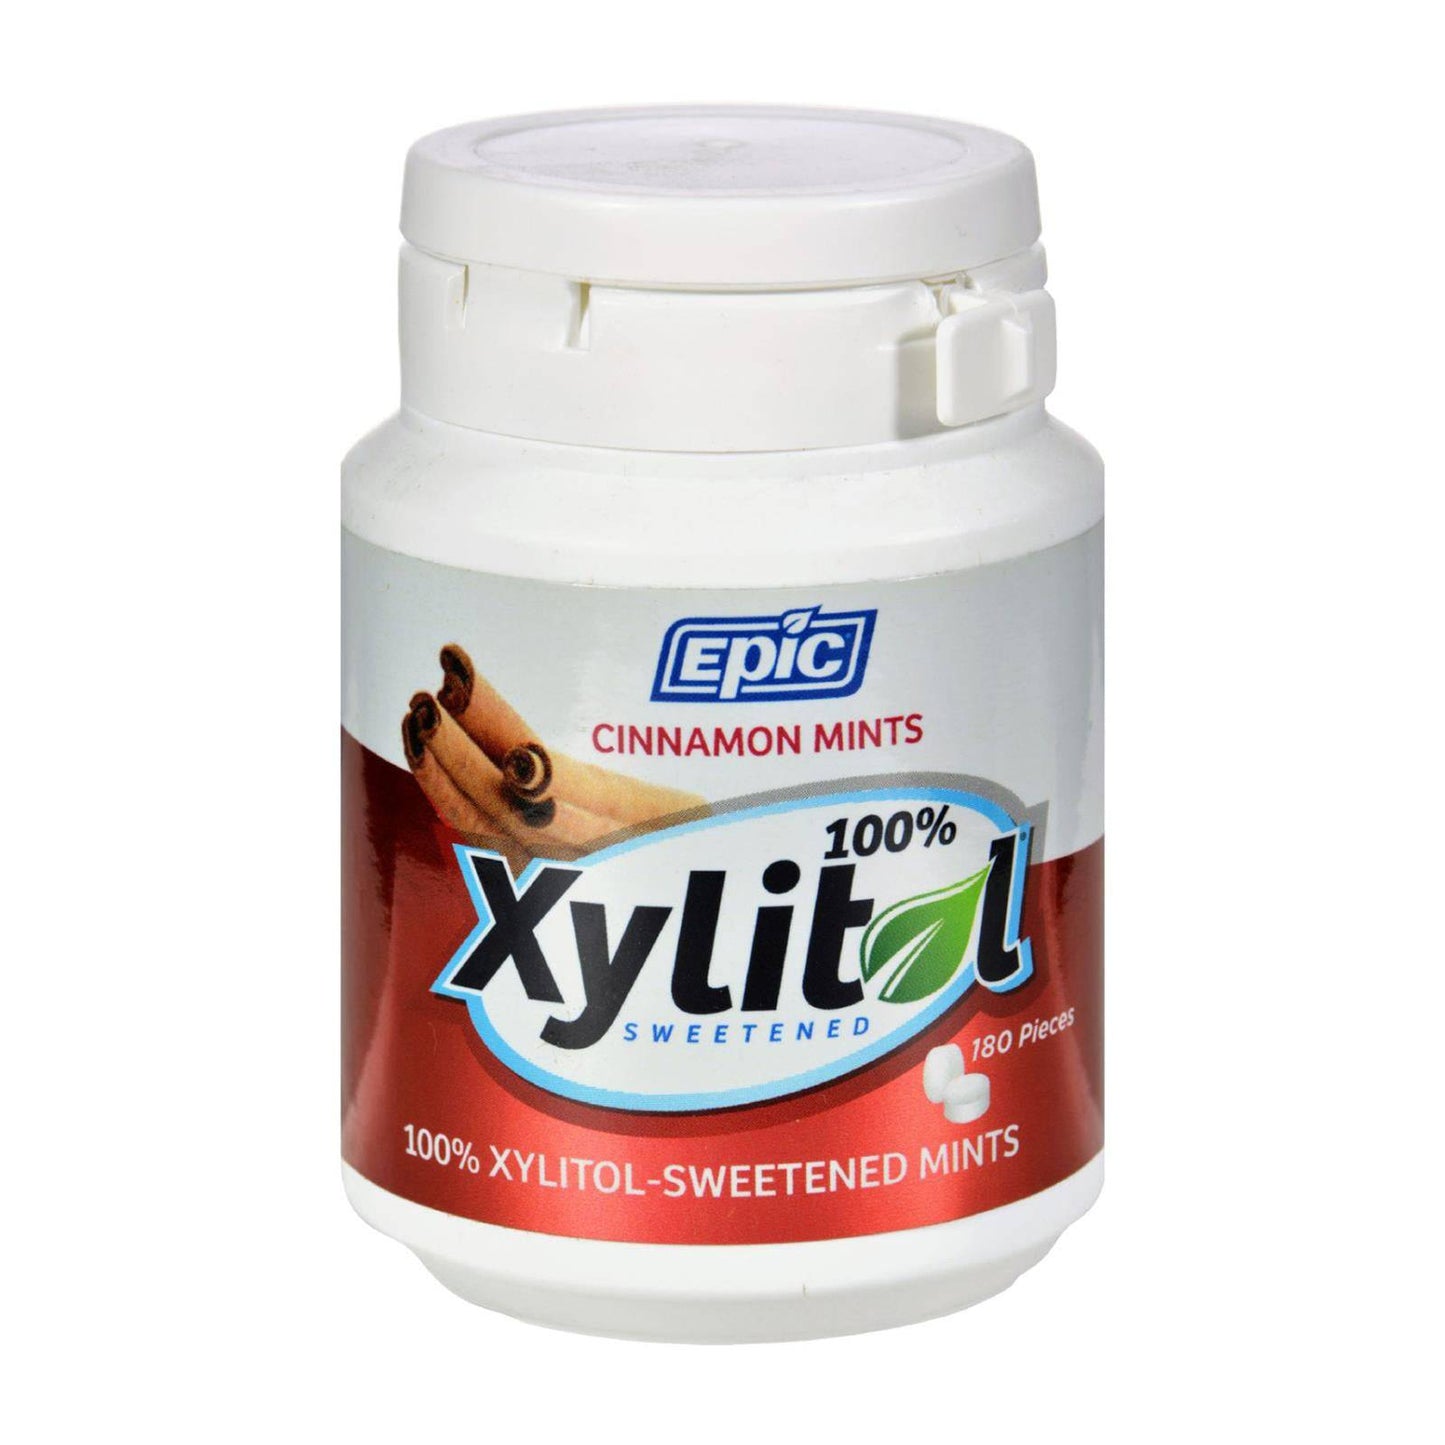 Buy Epic Dental - Xylitol Mints - Cinnamon Xylitol Bottle - 180 Ct  at OnlyNaturals.us